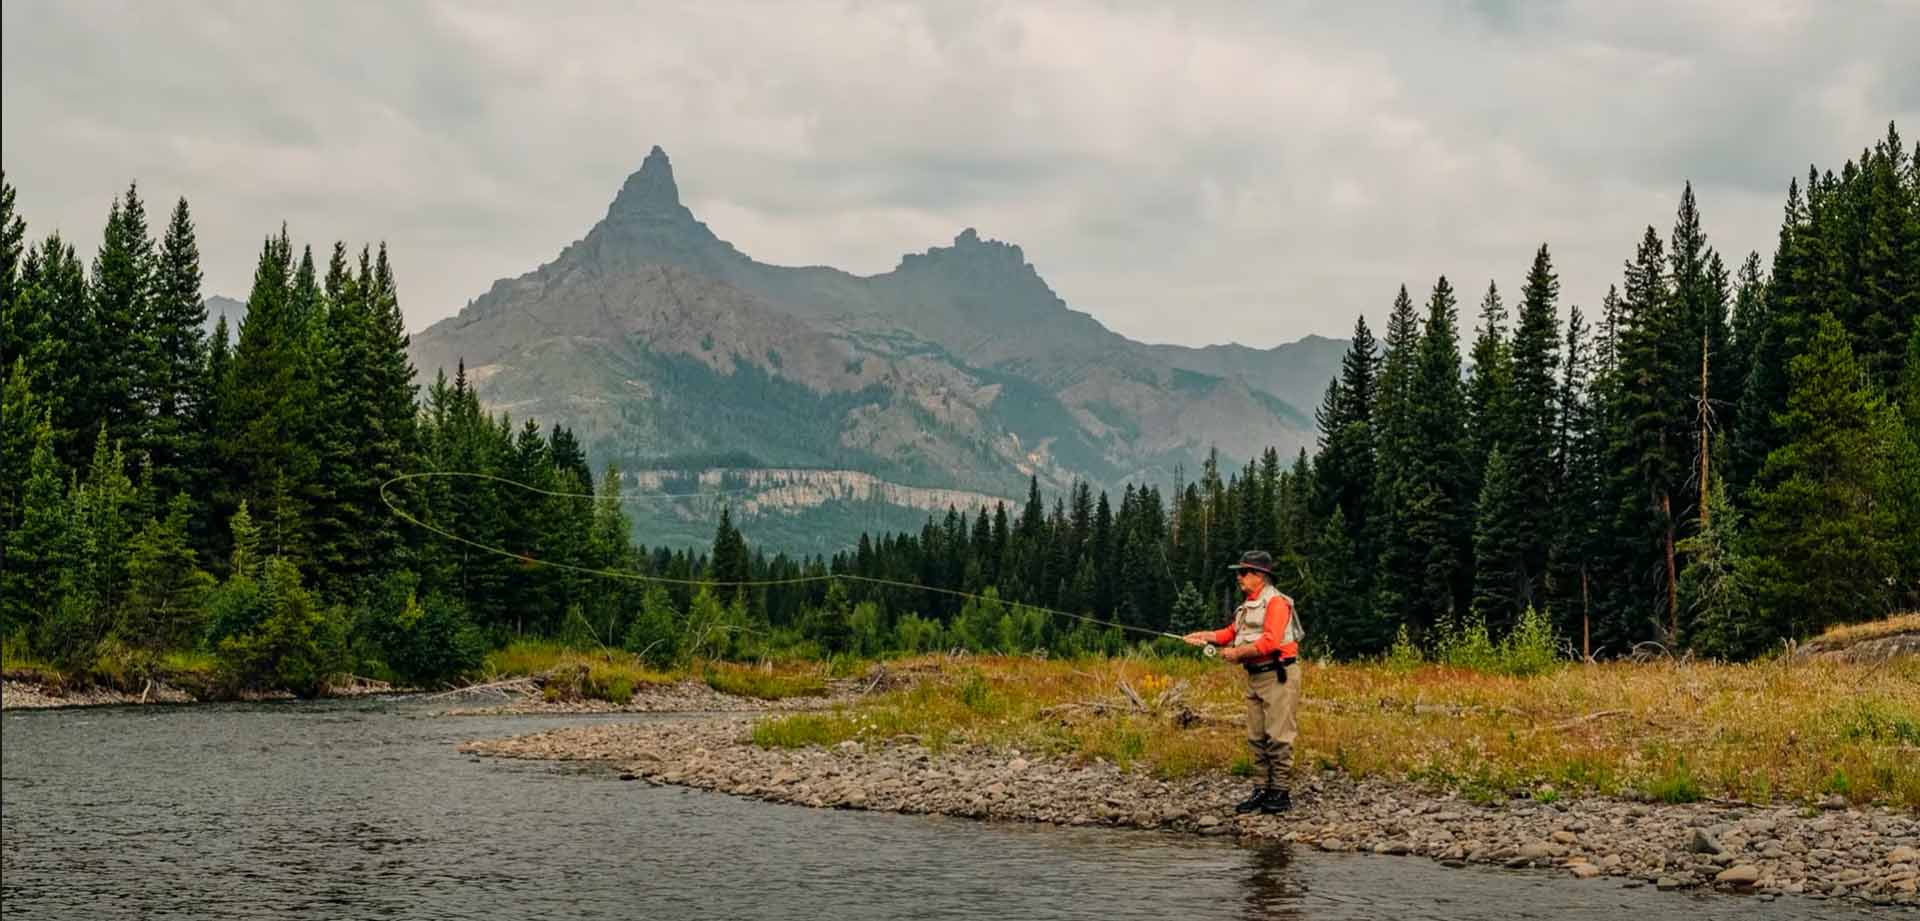 Man fly fishing in a river